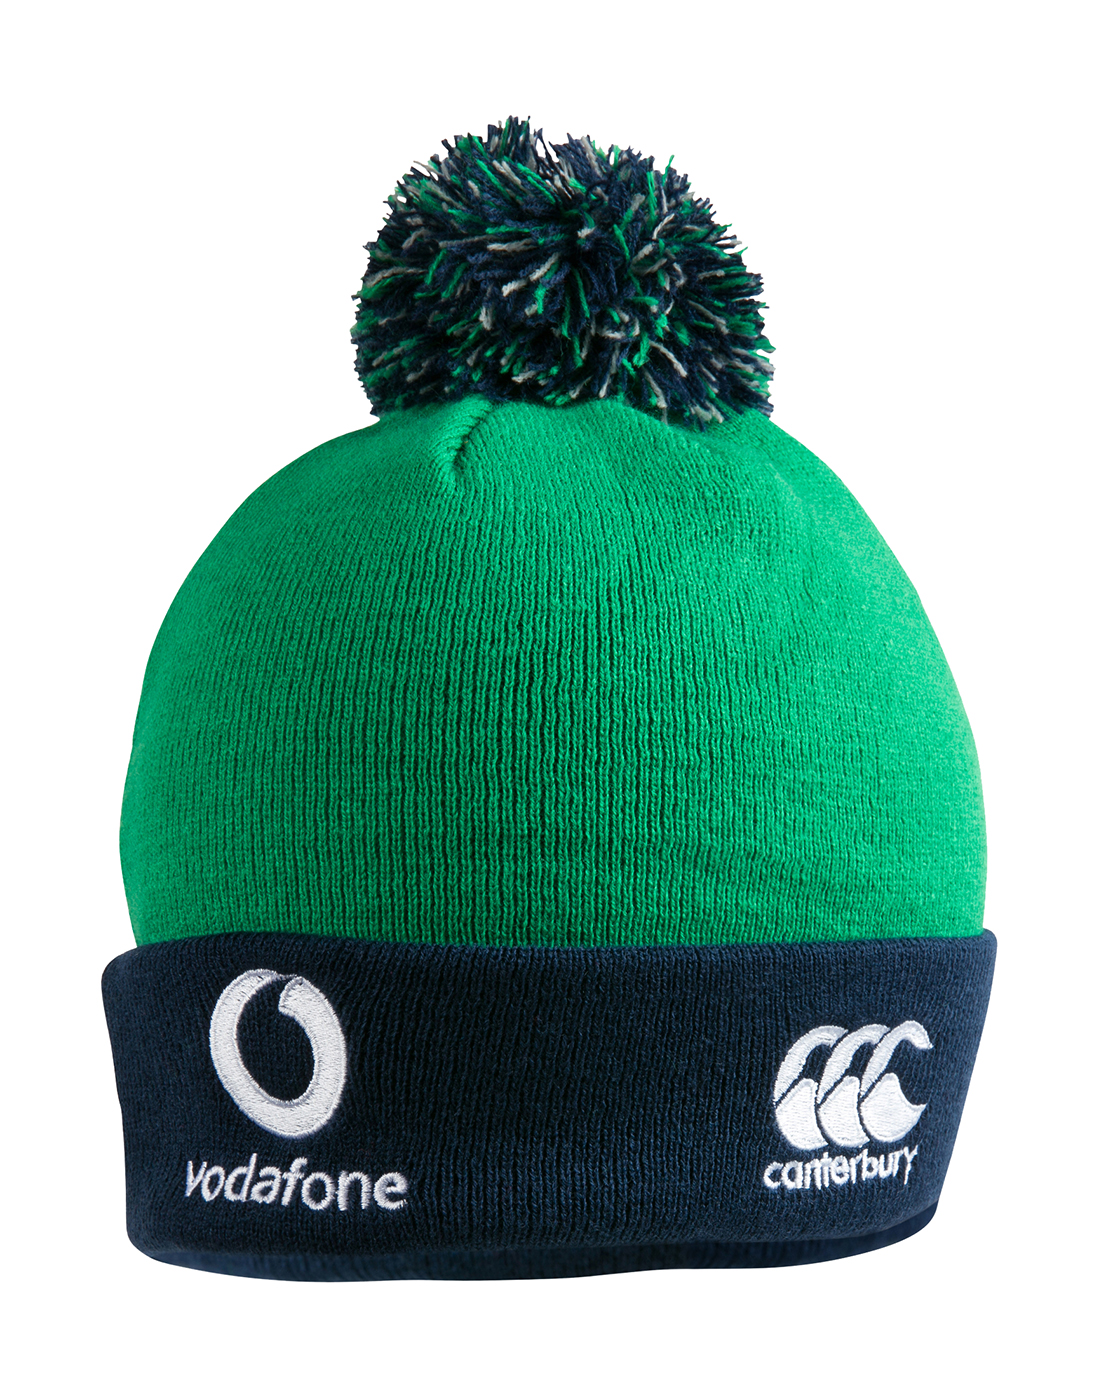 Navy BOBBLE BEANIE Toque Hat Pompom Official IRELAND Canterbury RUGBY Green 